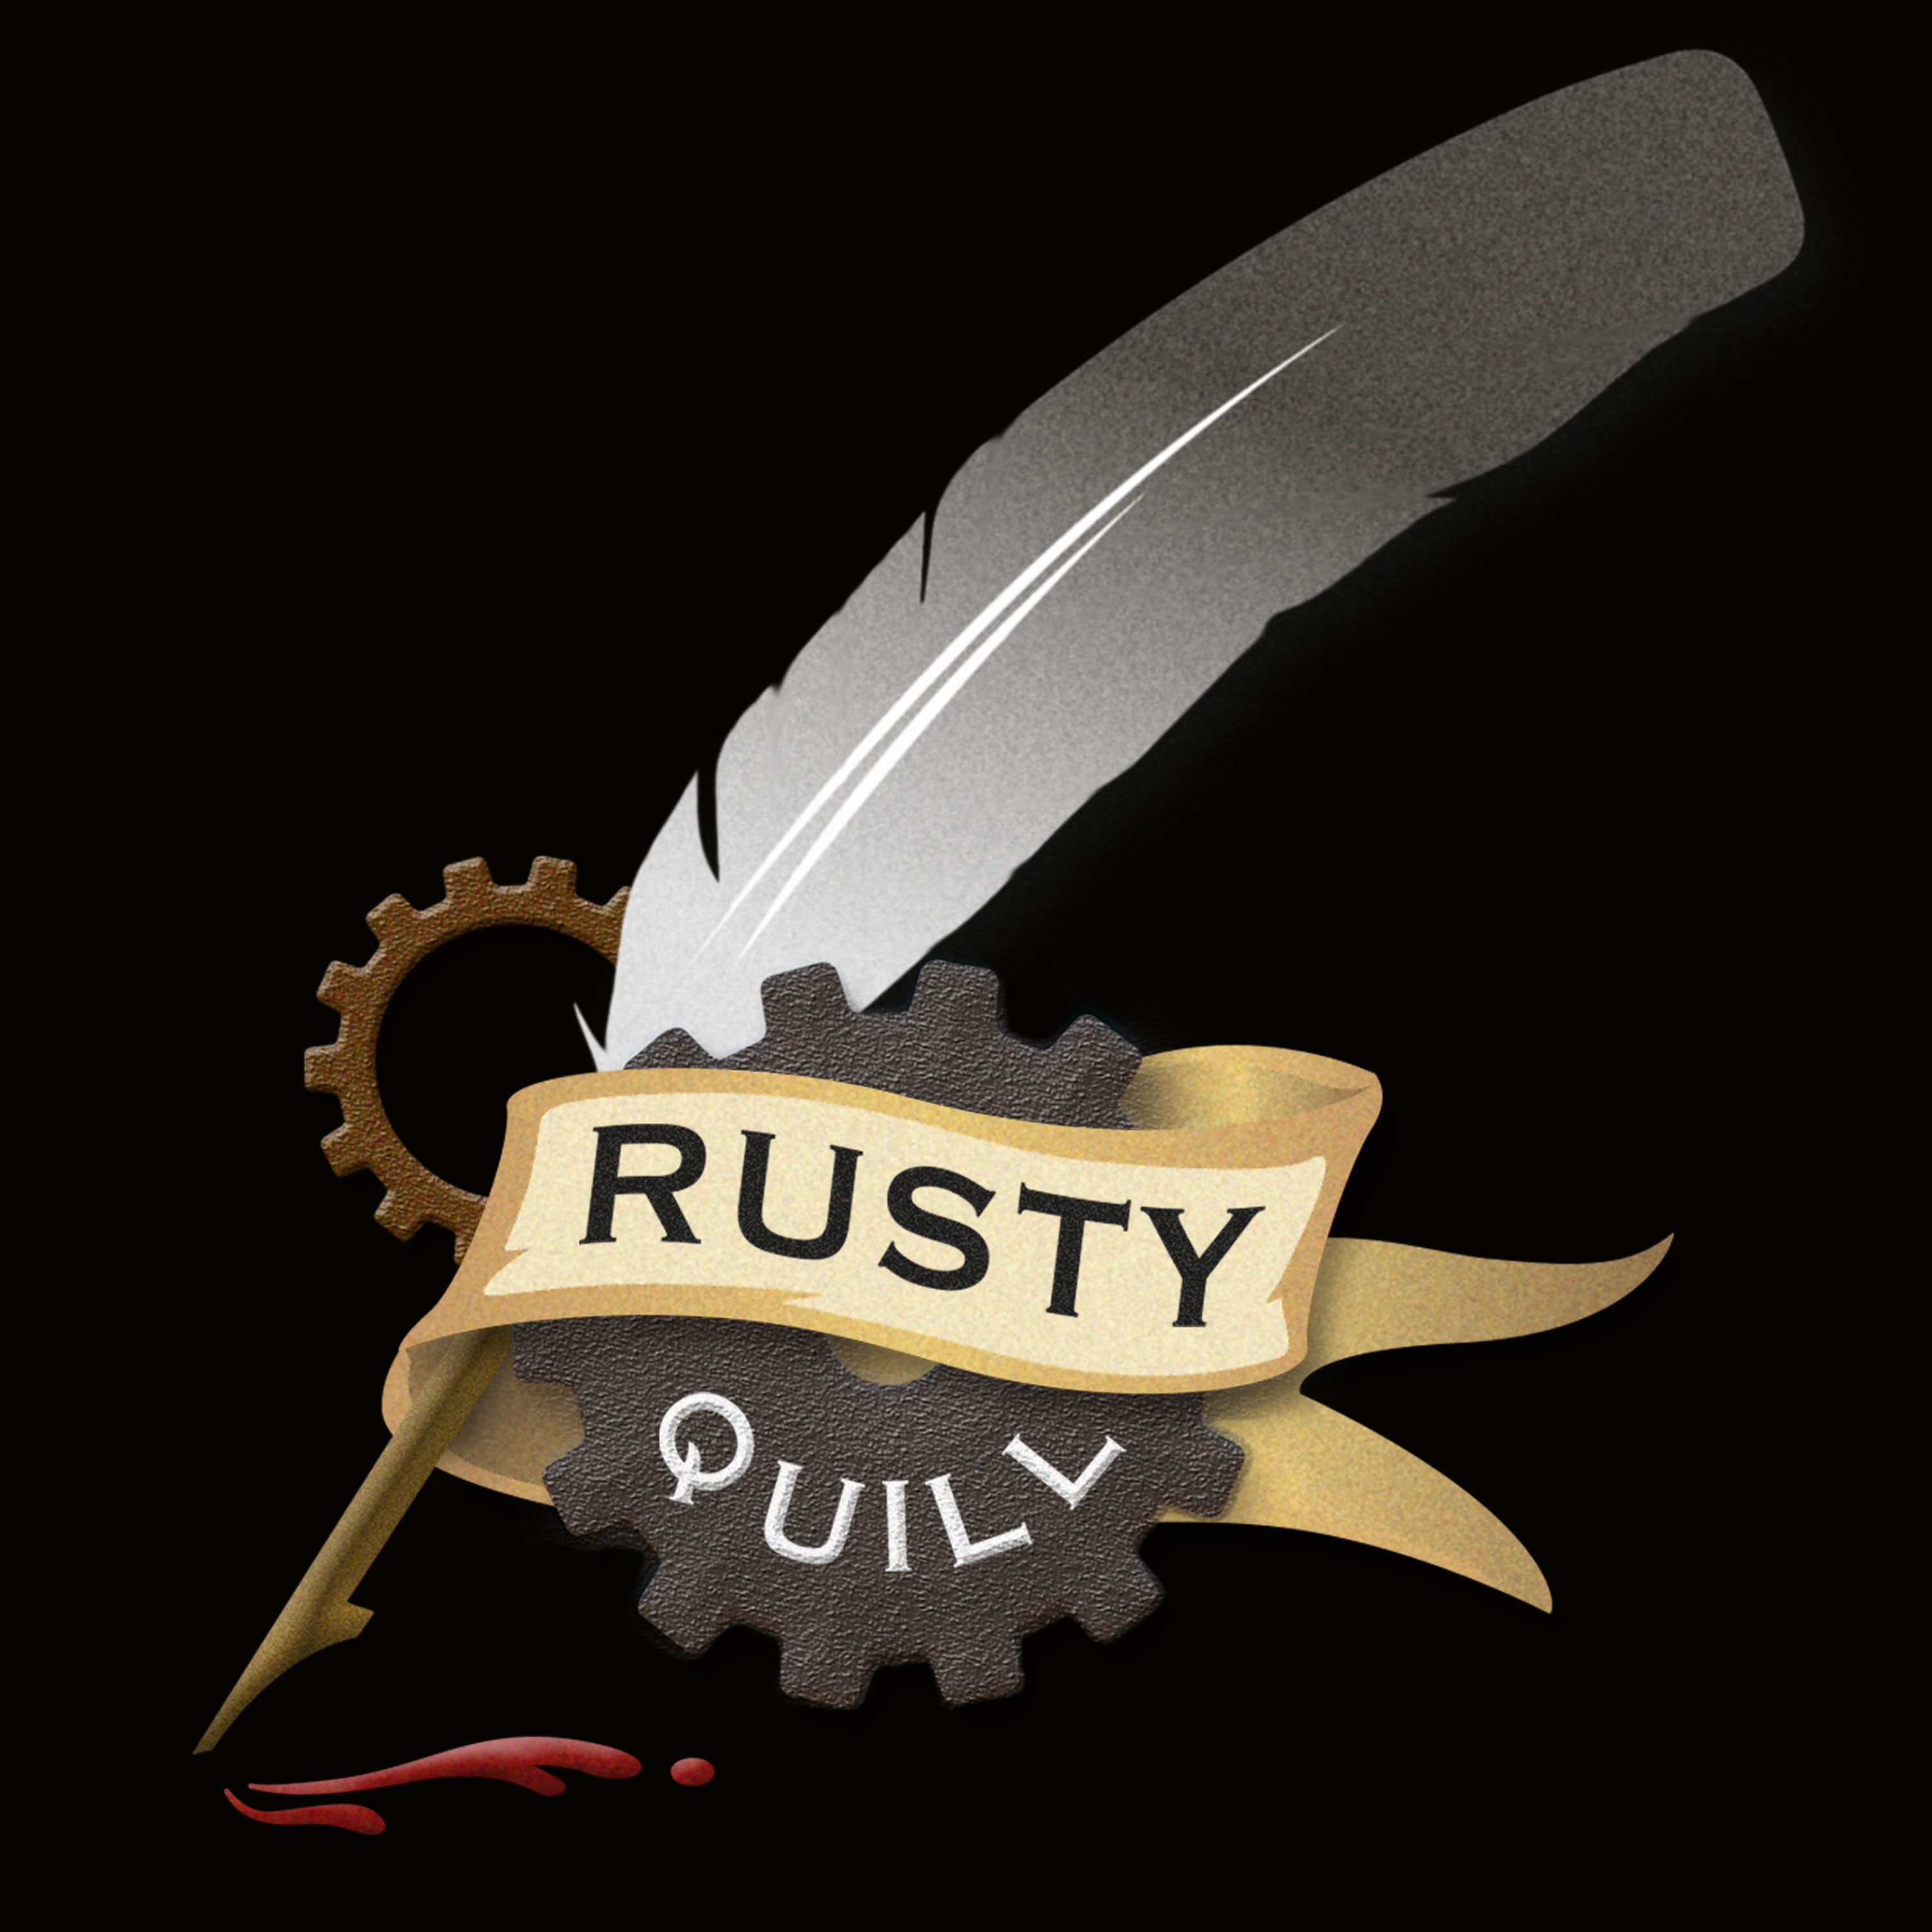 Positions available at Rusty Quill